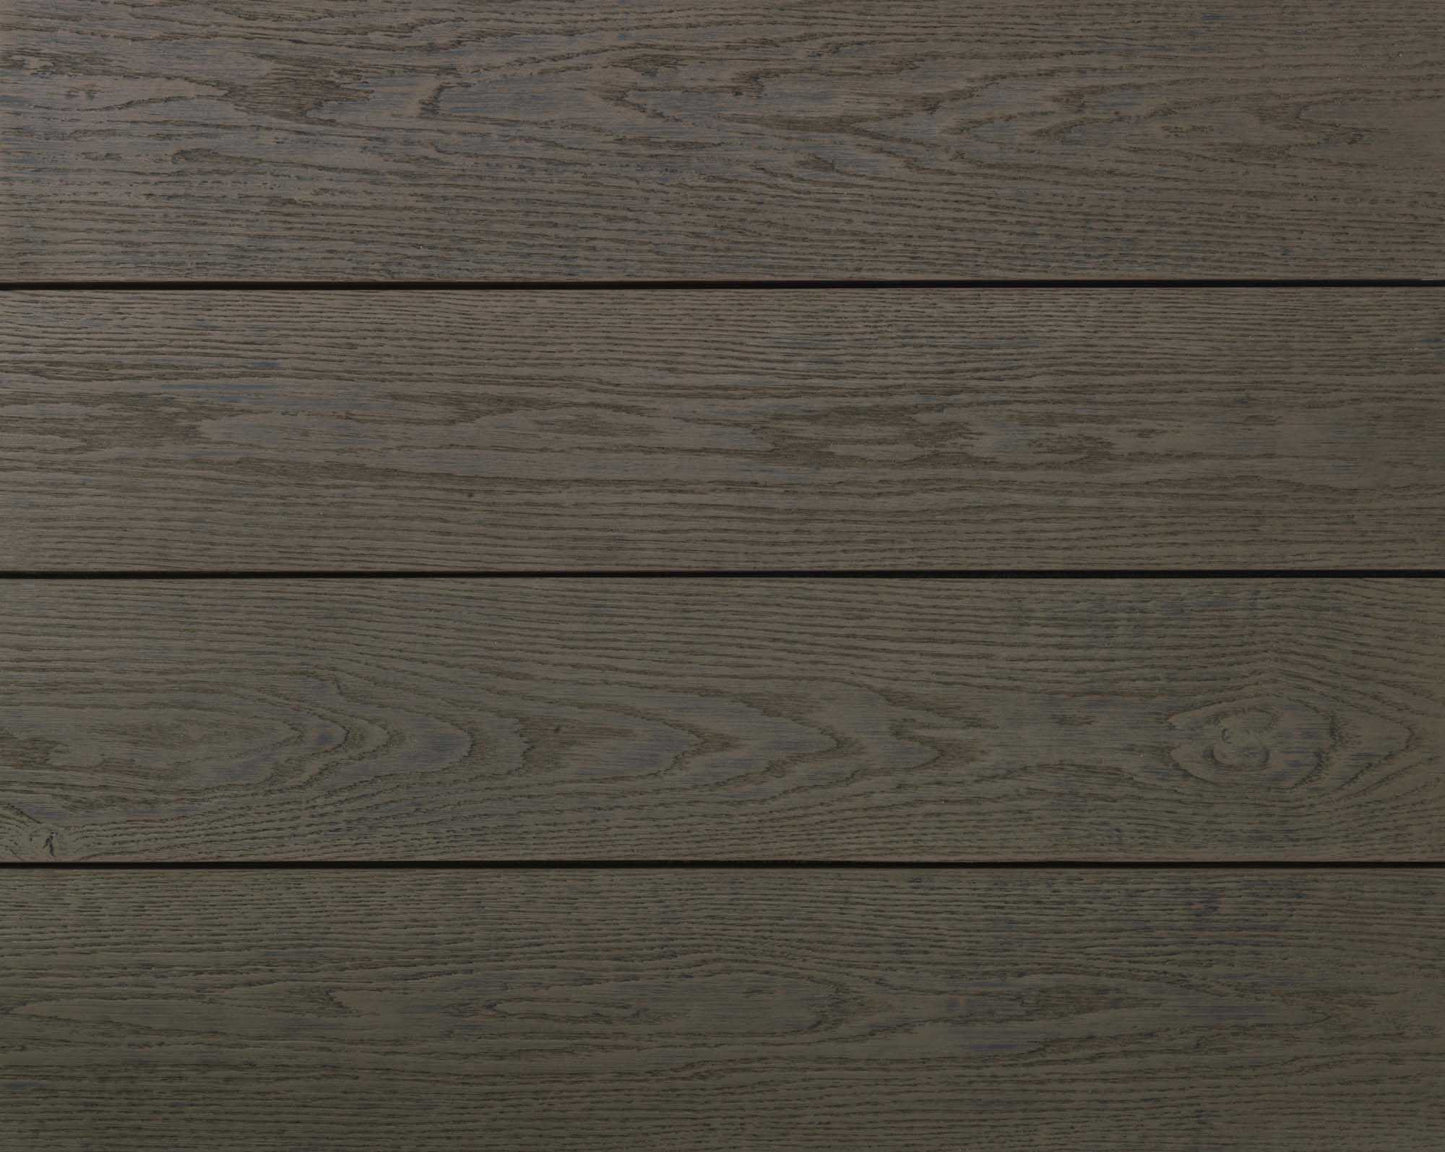 Millboard Bullnose Edging (Flexible) - Composite Decking Company